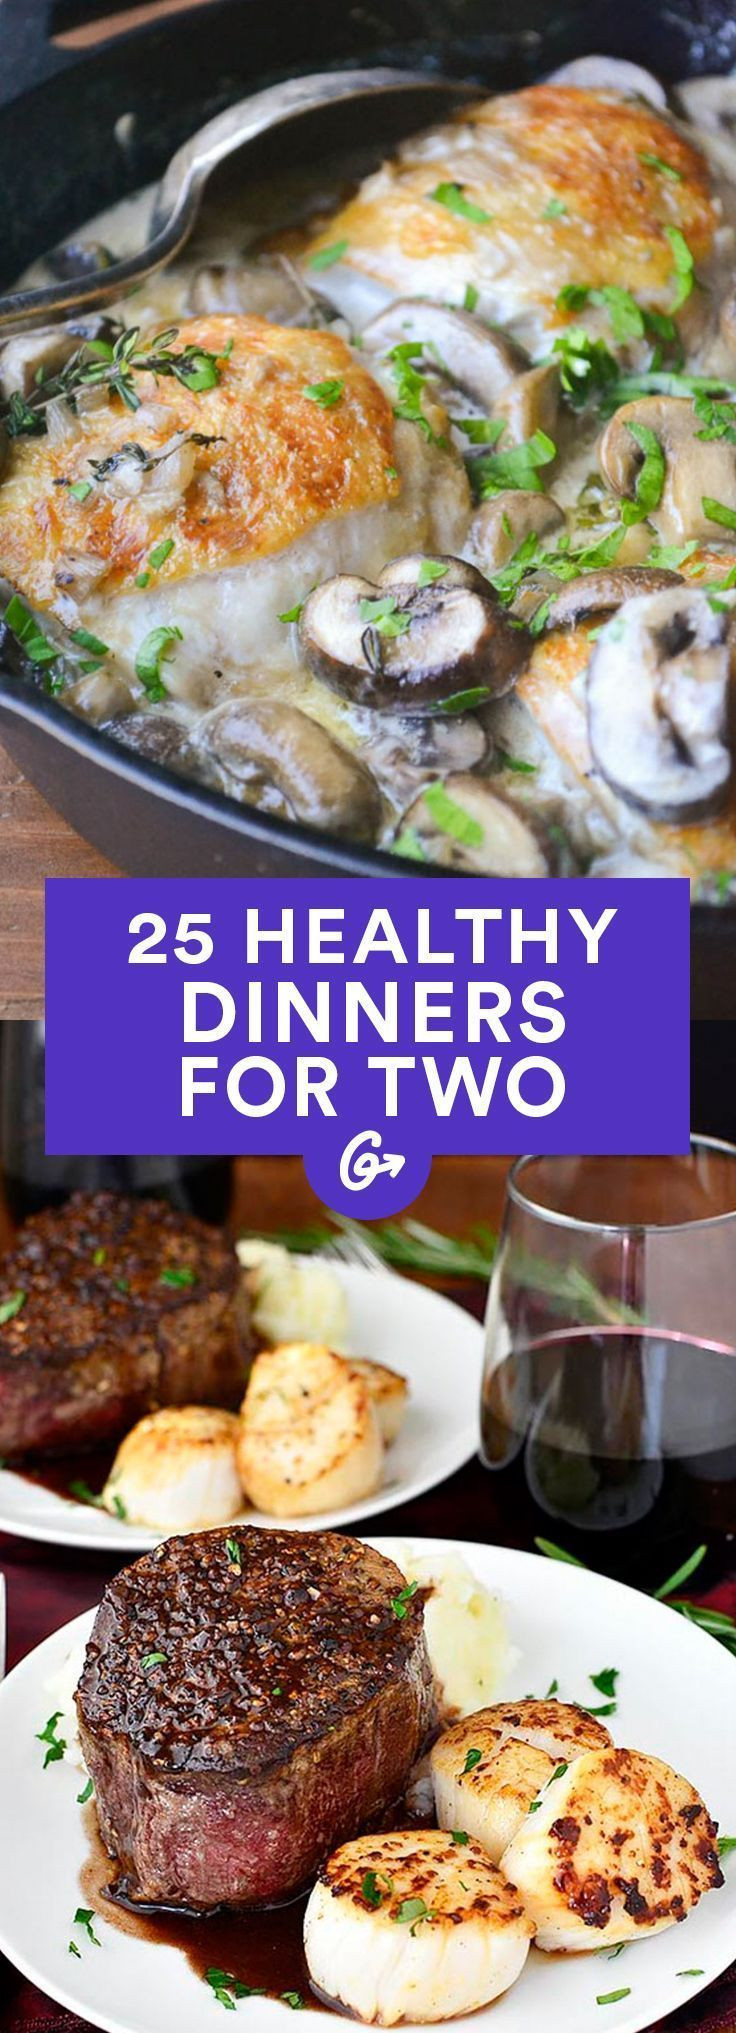 Healthy Affordable Dinners
 100 Healthy Dinner Recipes on Pinterest